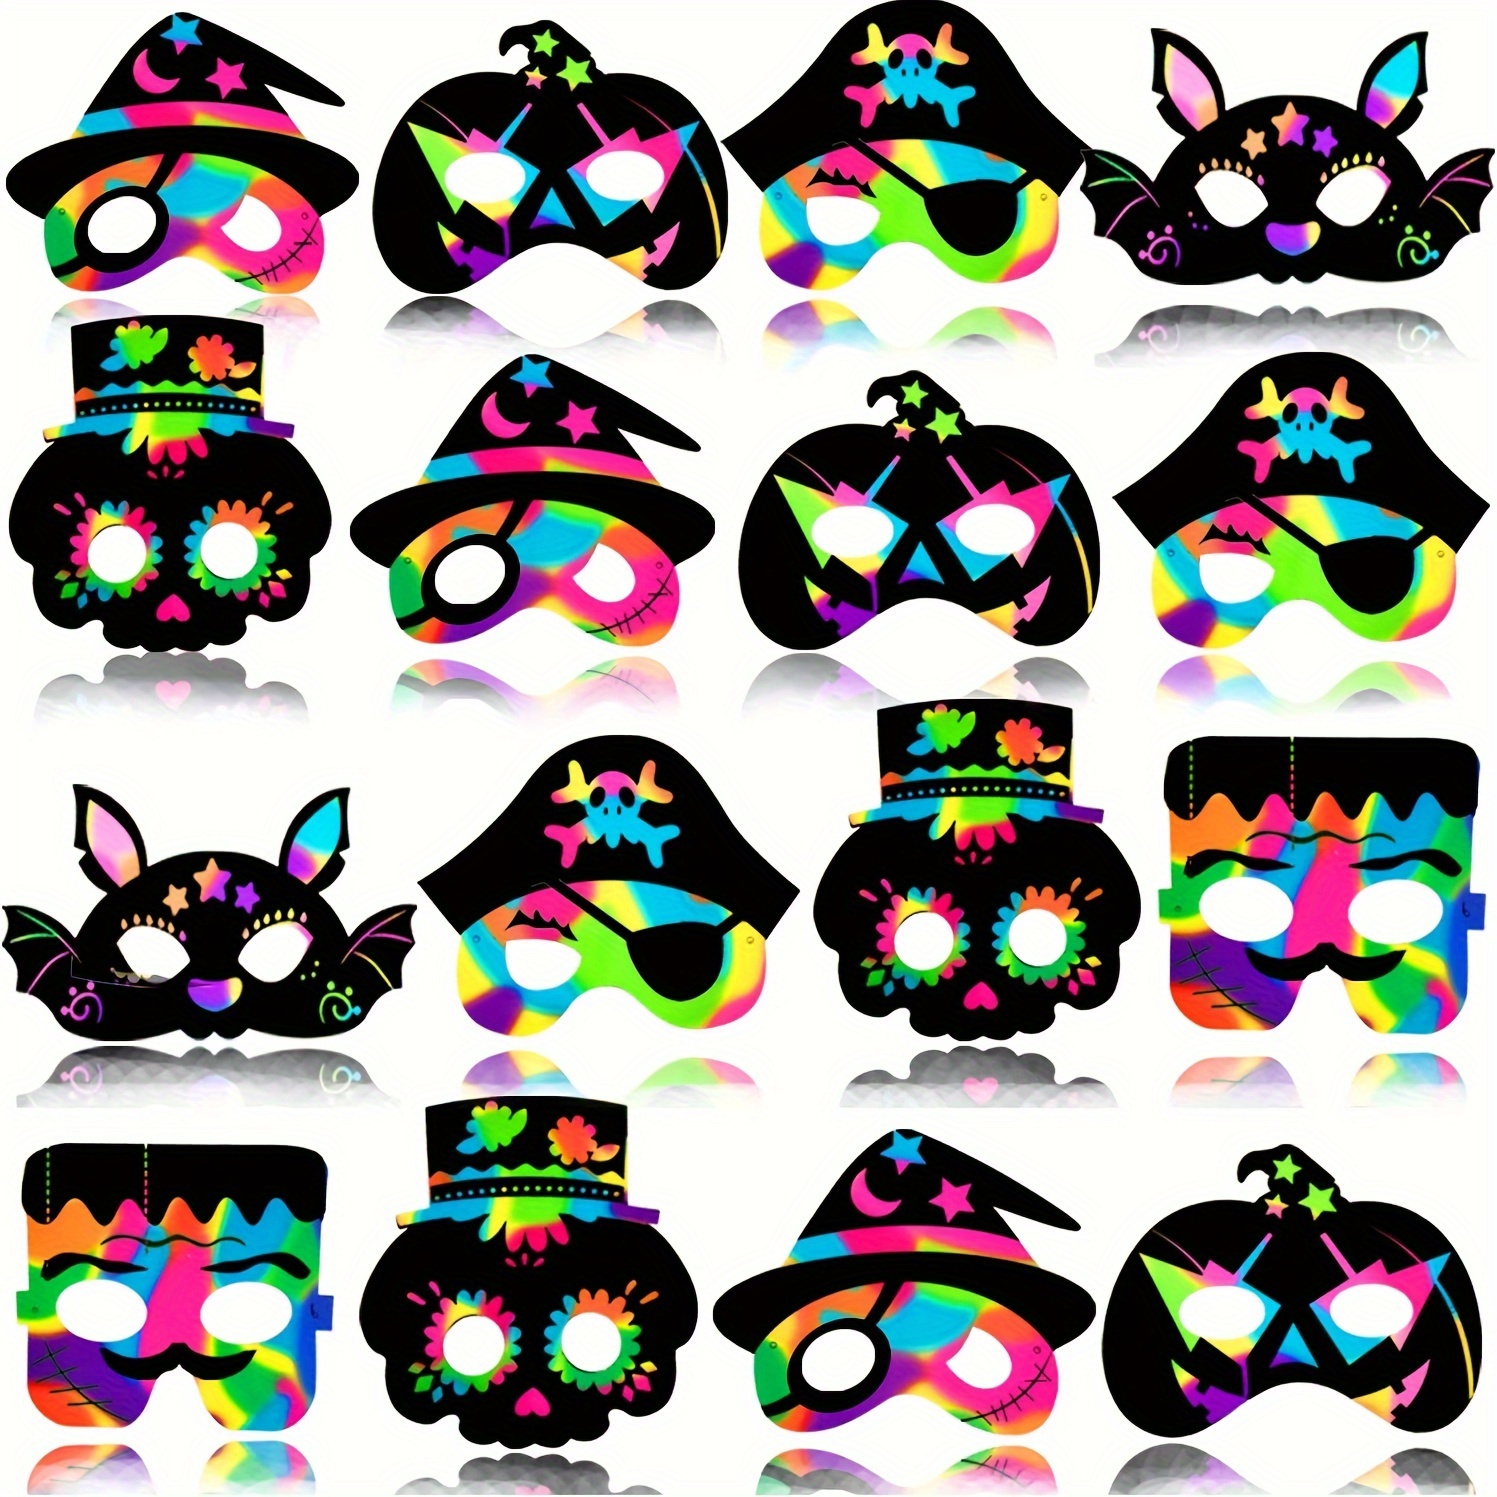 

24 Pcs Halloween Scratch Art Mask Kit - Diy Rainbow Scratch Paper Masks With 24 Wooden Styluses & 24 Ribbons, Creative Craft Project For Classroom, Home, Dress-up, Mardi Gras, Party Favors & Gifts